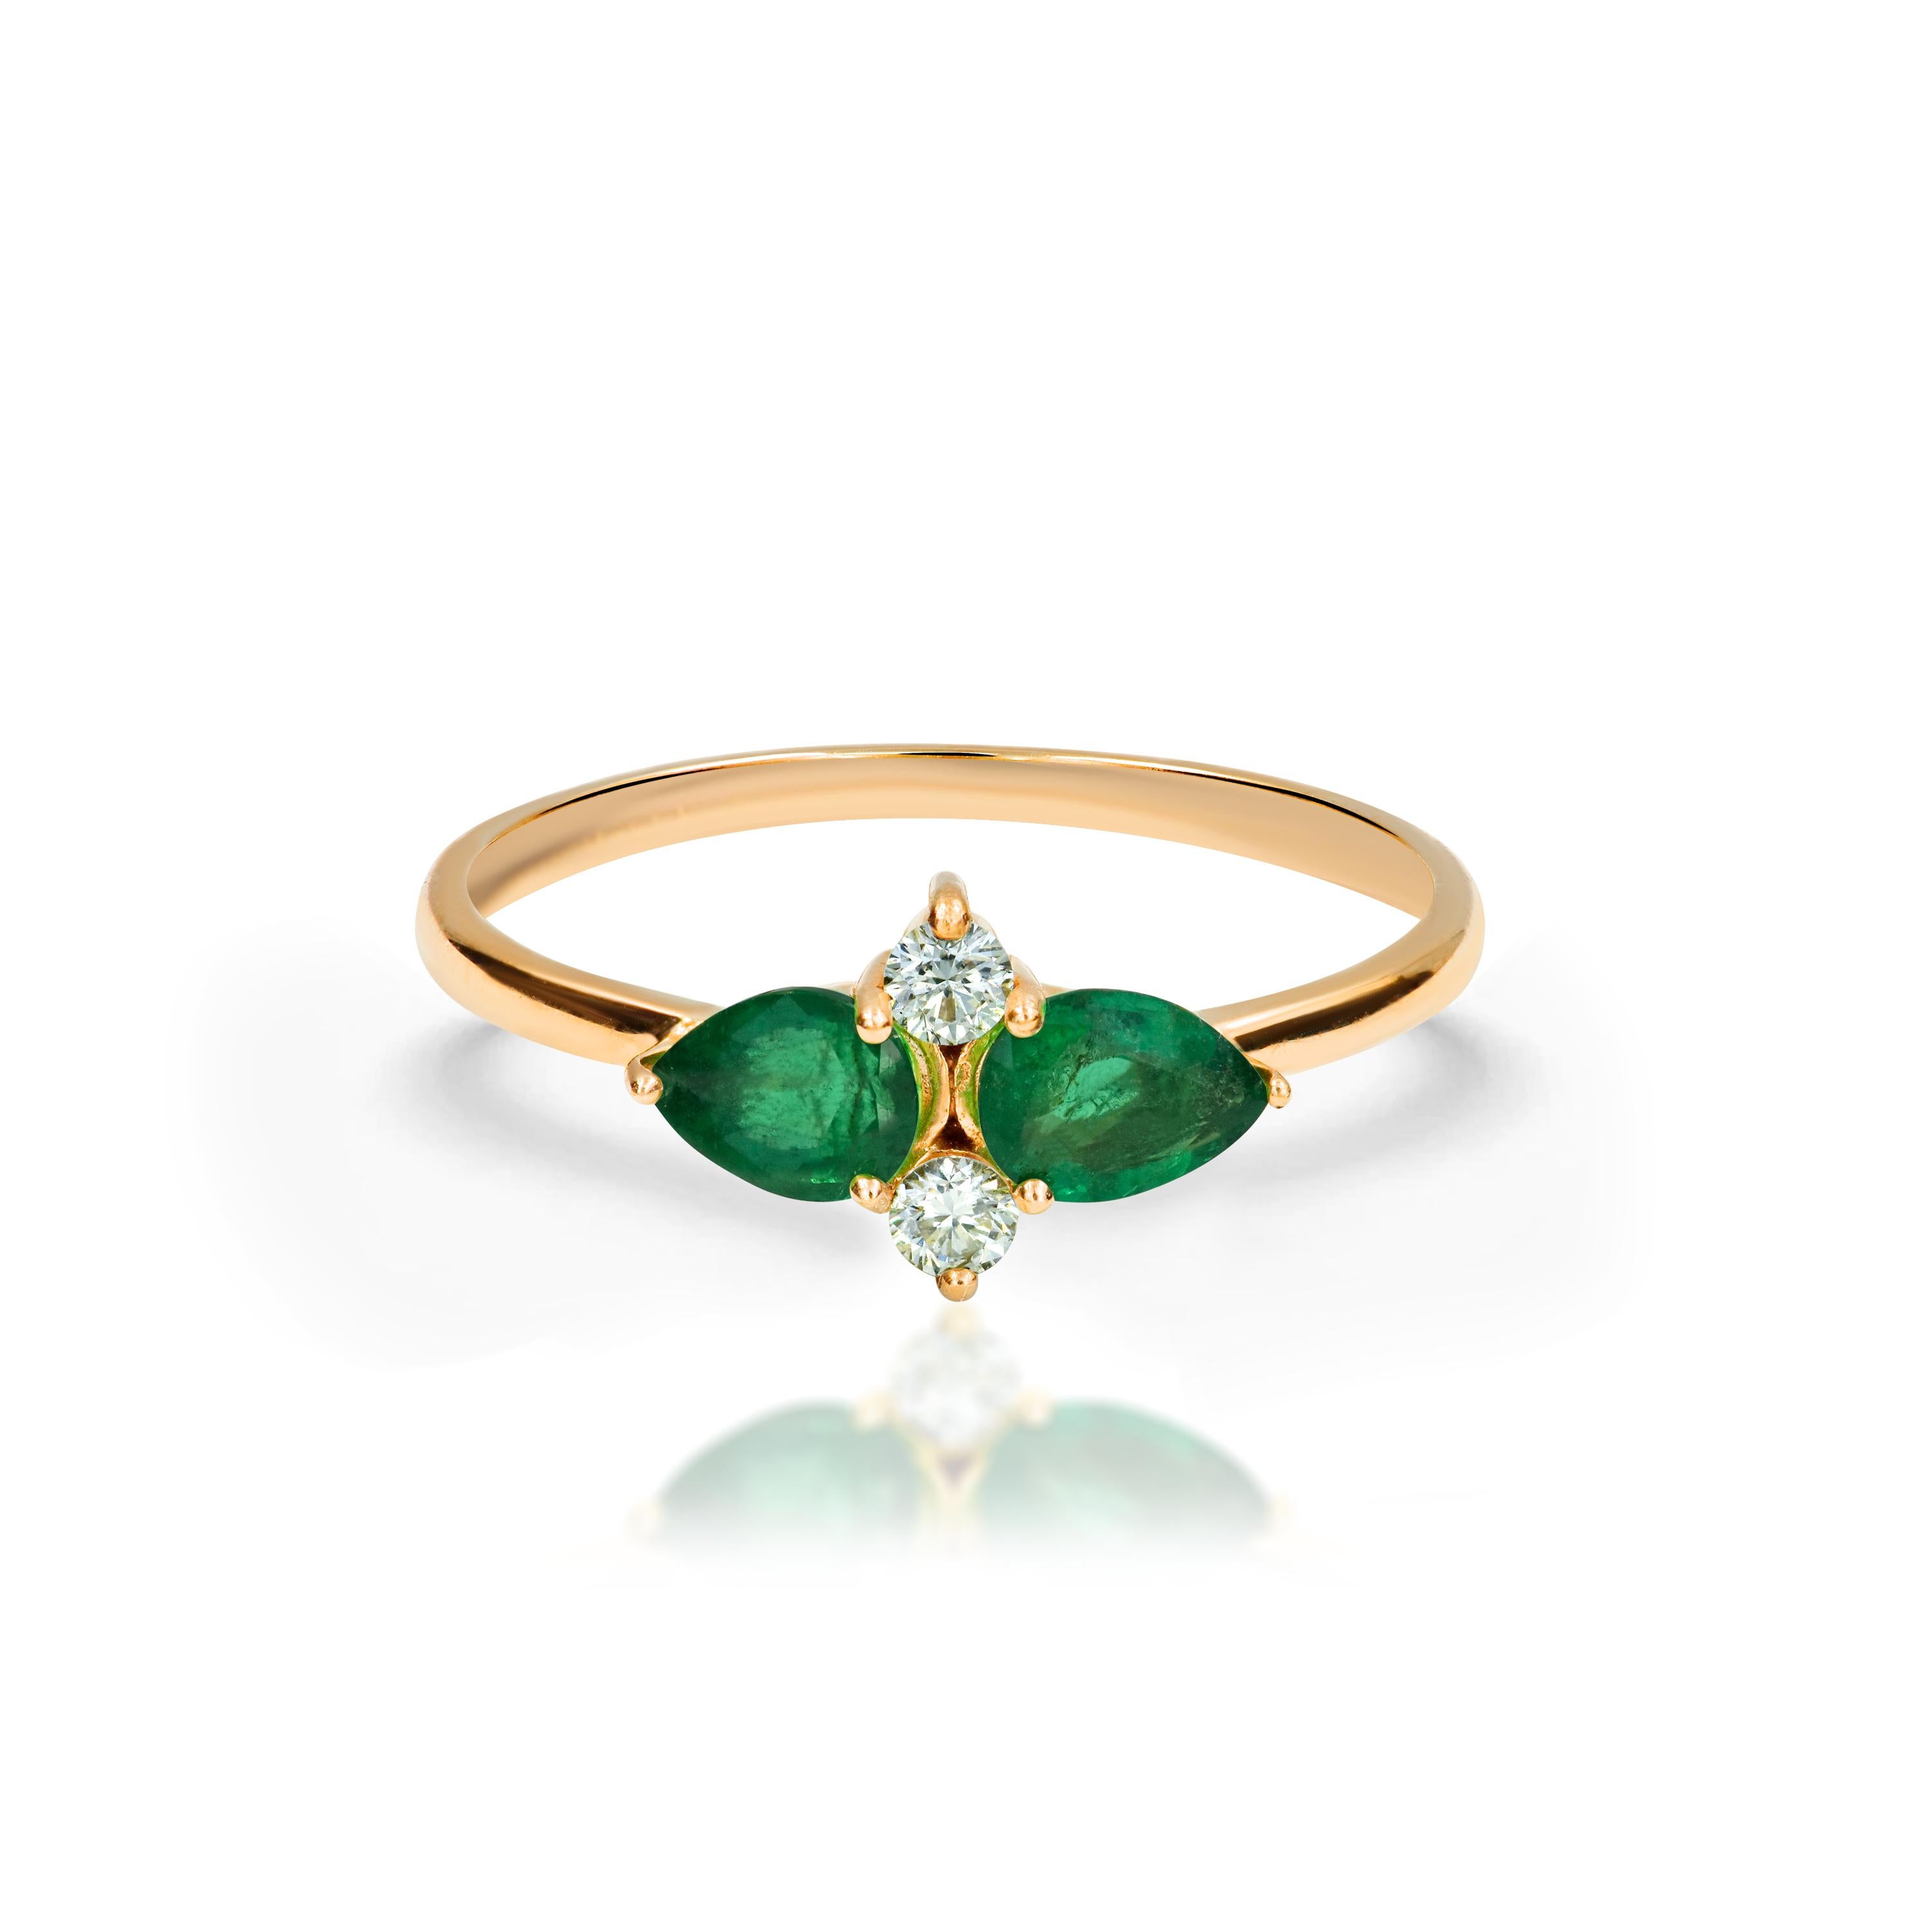 For Sale:  18k Gold Pear Shape 0.56 Carat Emerald and Diamond Engagement Ring 2